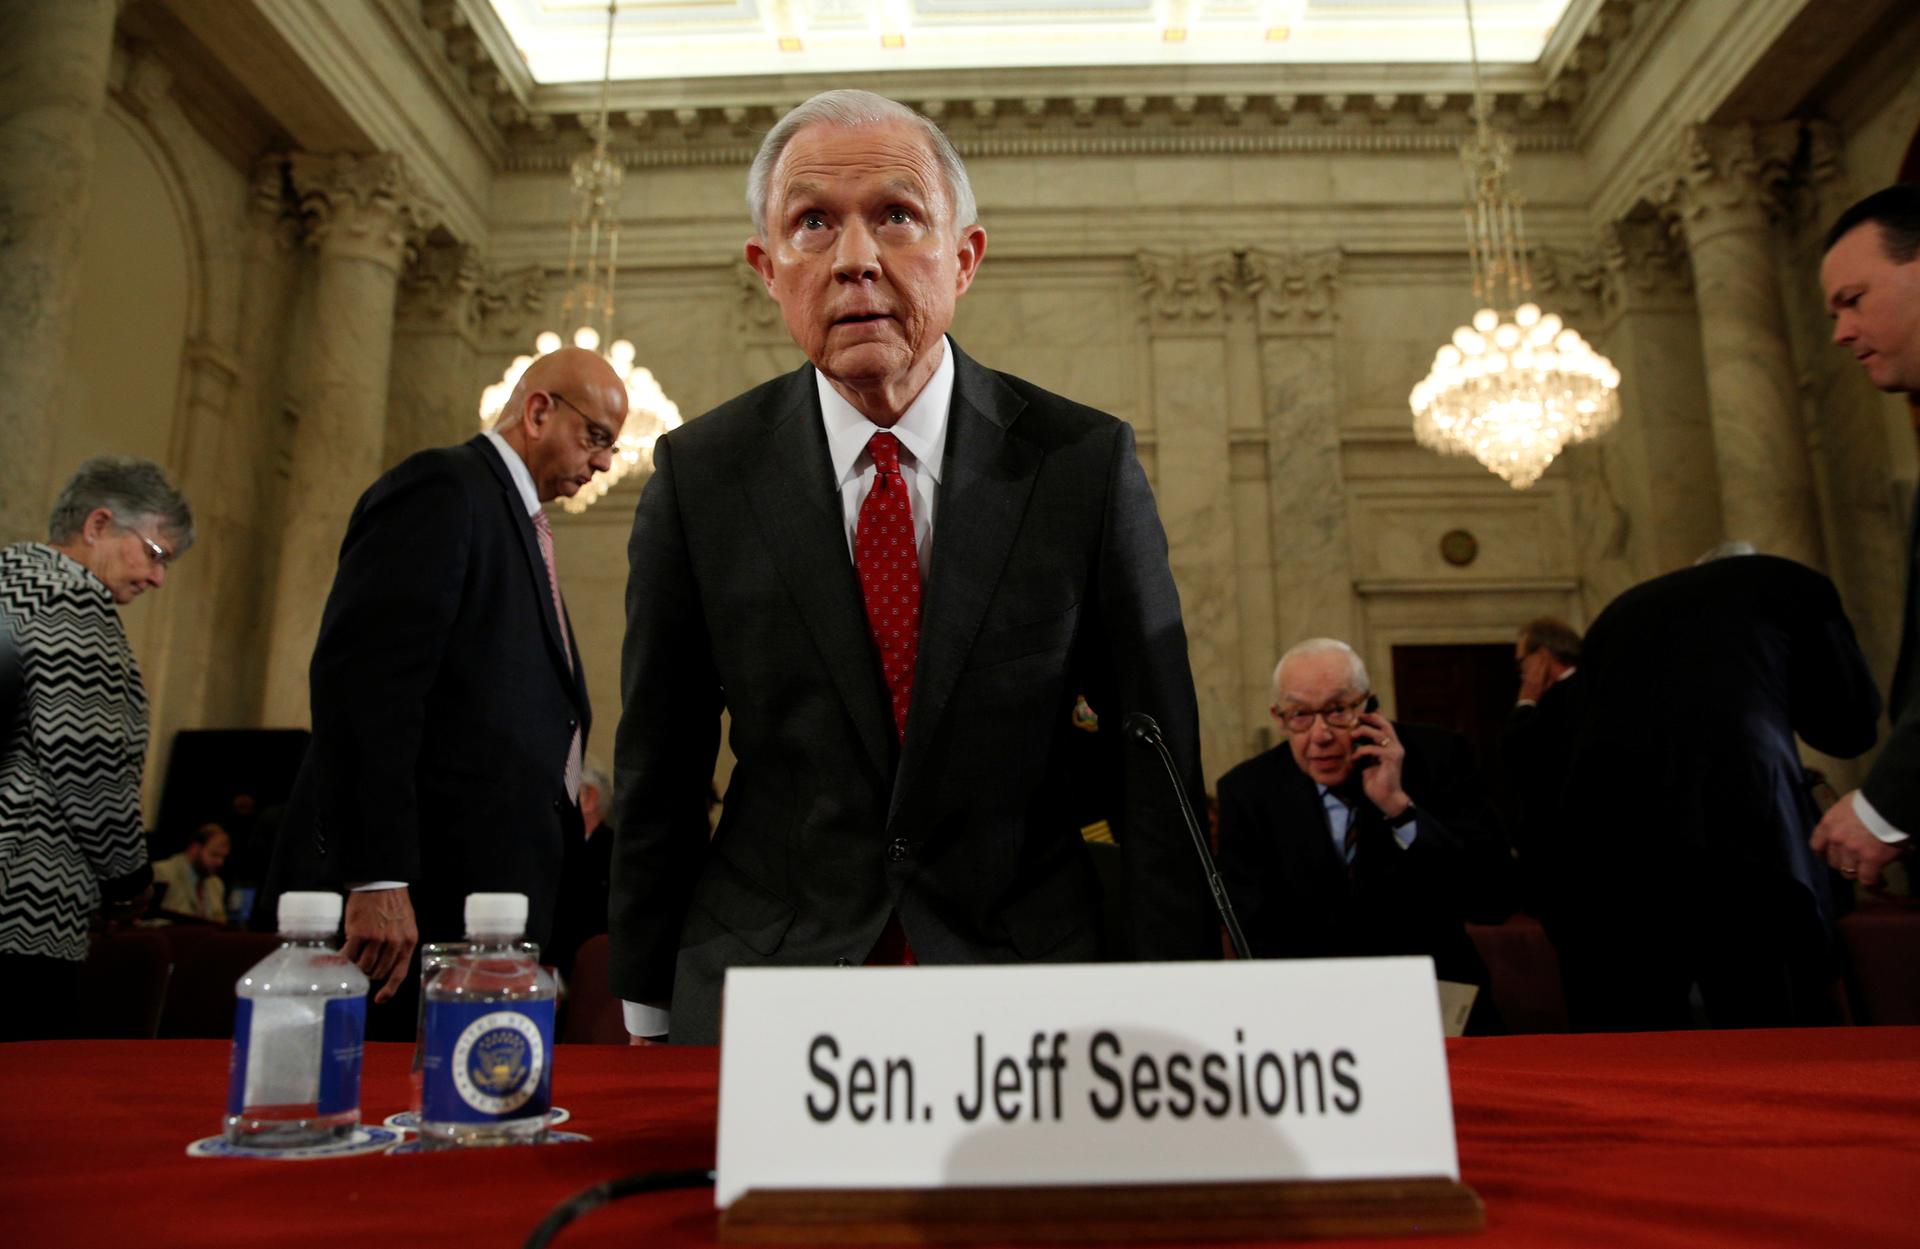 Jeff Sessions takes his seat during his testimony before the Senate Judiciary Committee confirmation hearing